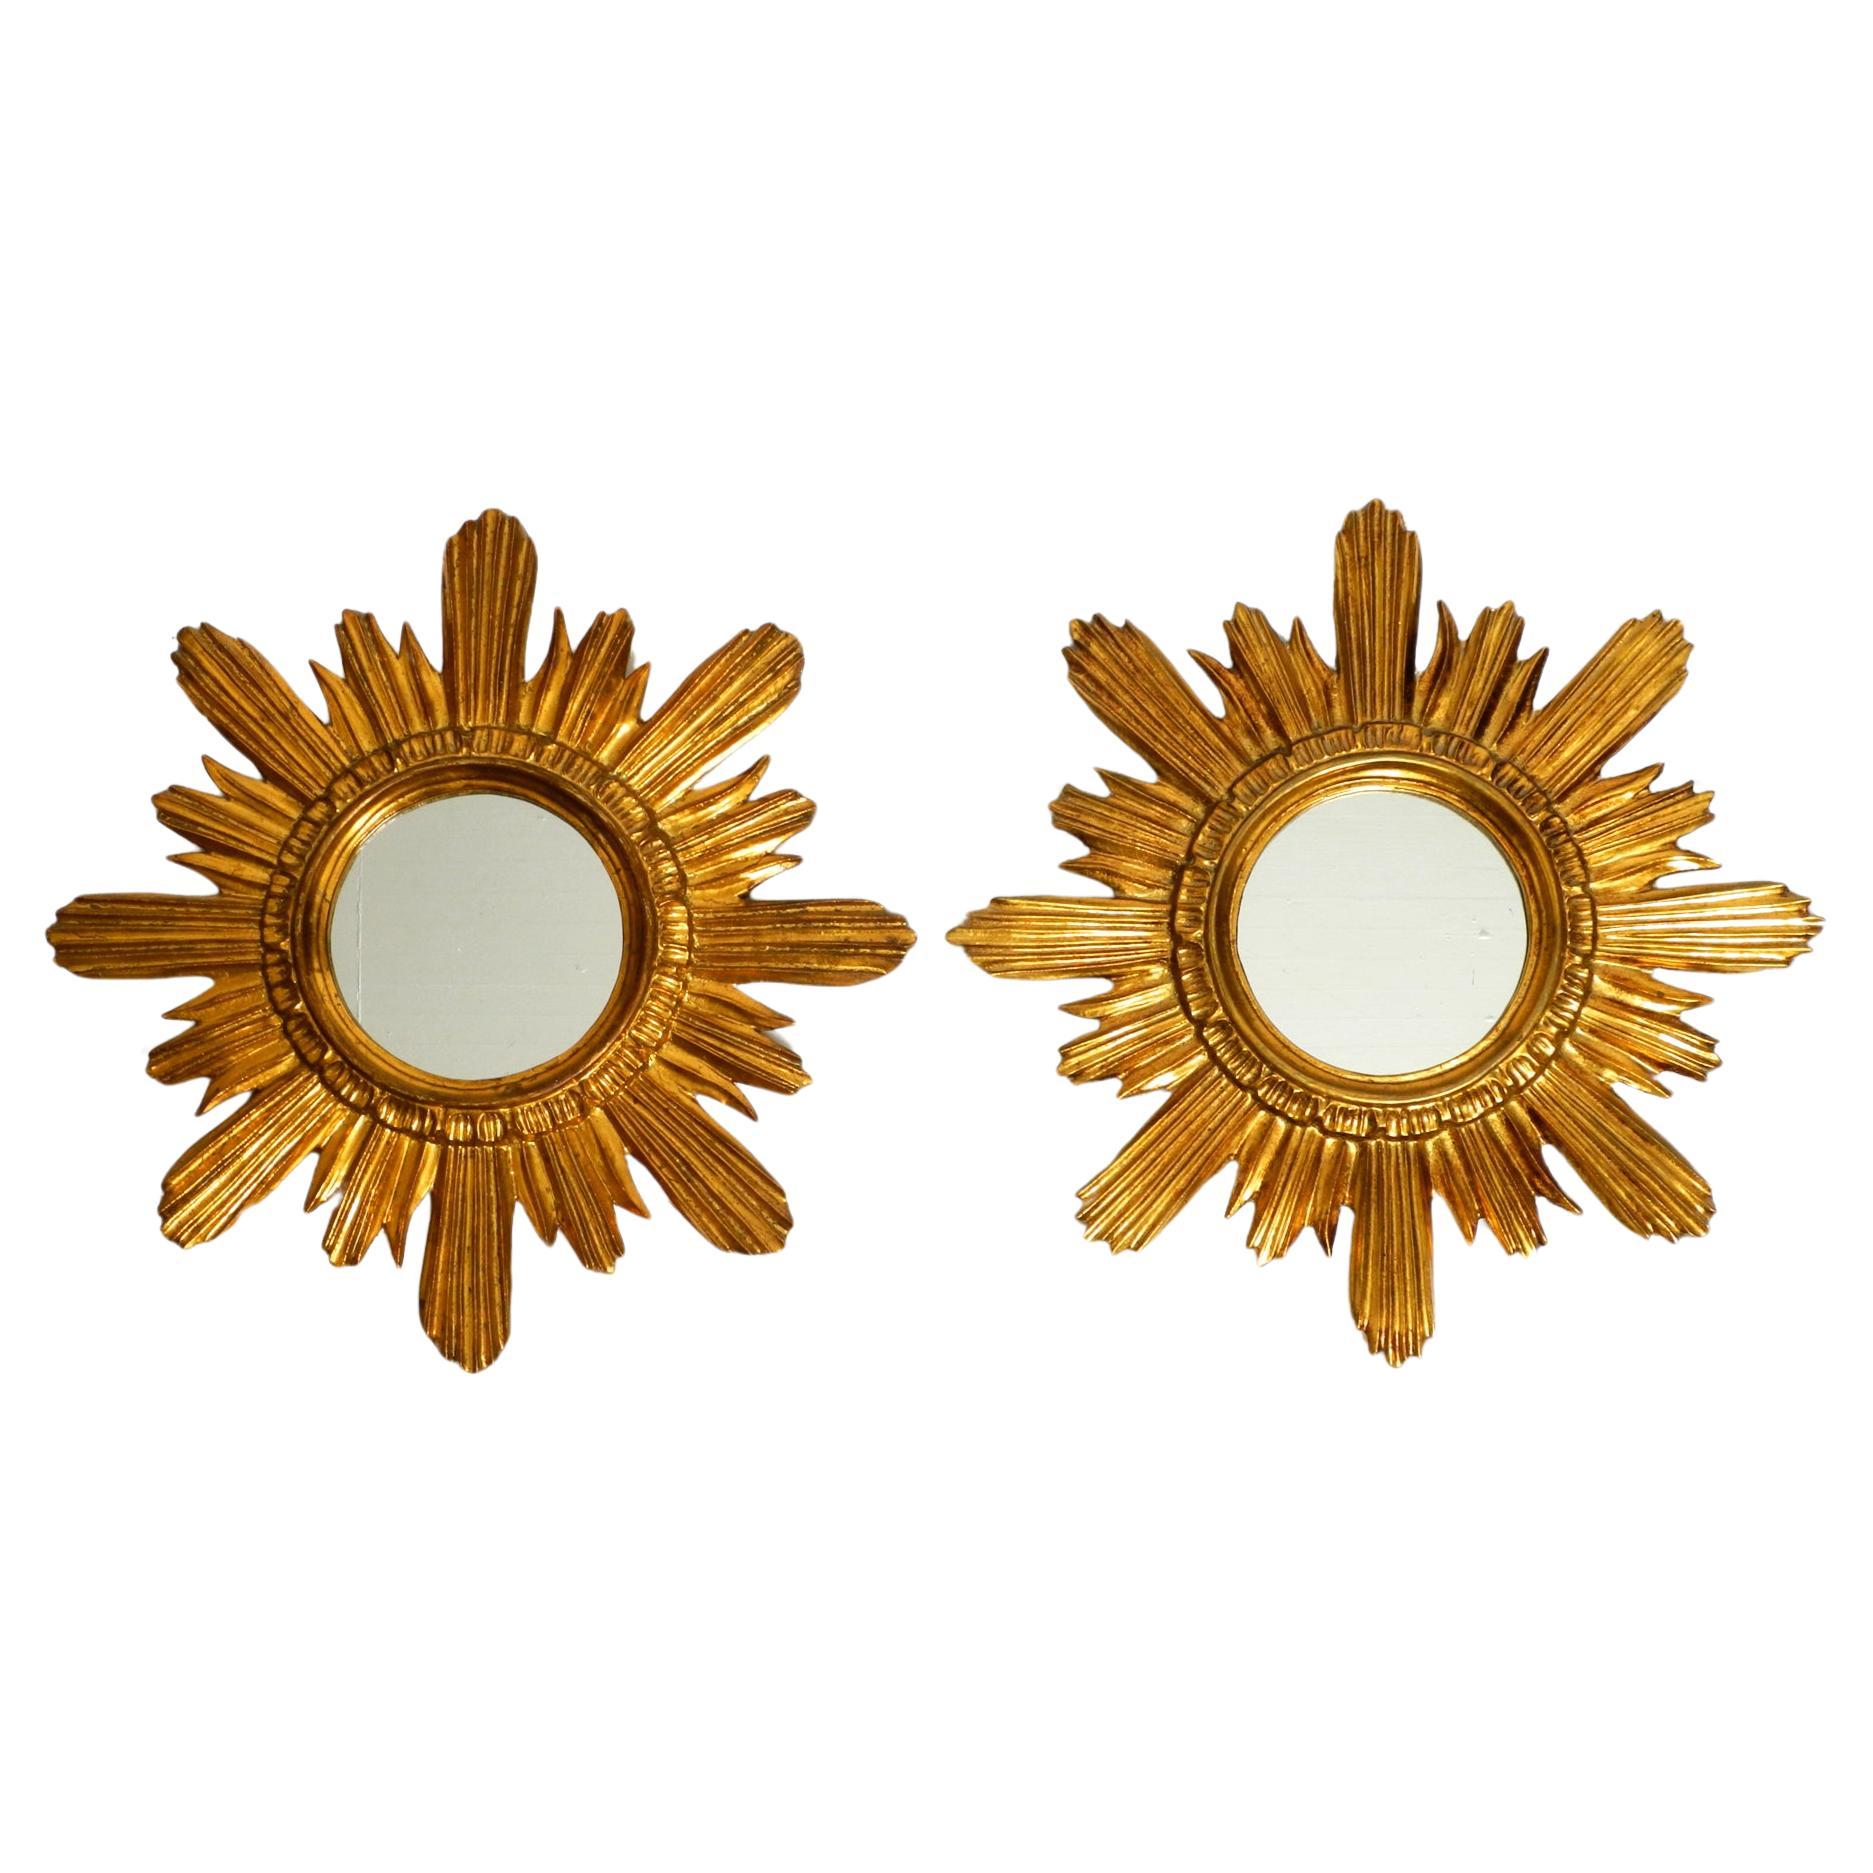 Pair of gold-plated mid-century sunburst wall mirrors made of wood and resin For Sale